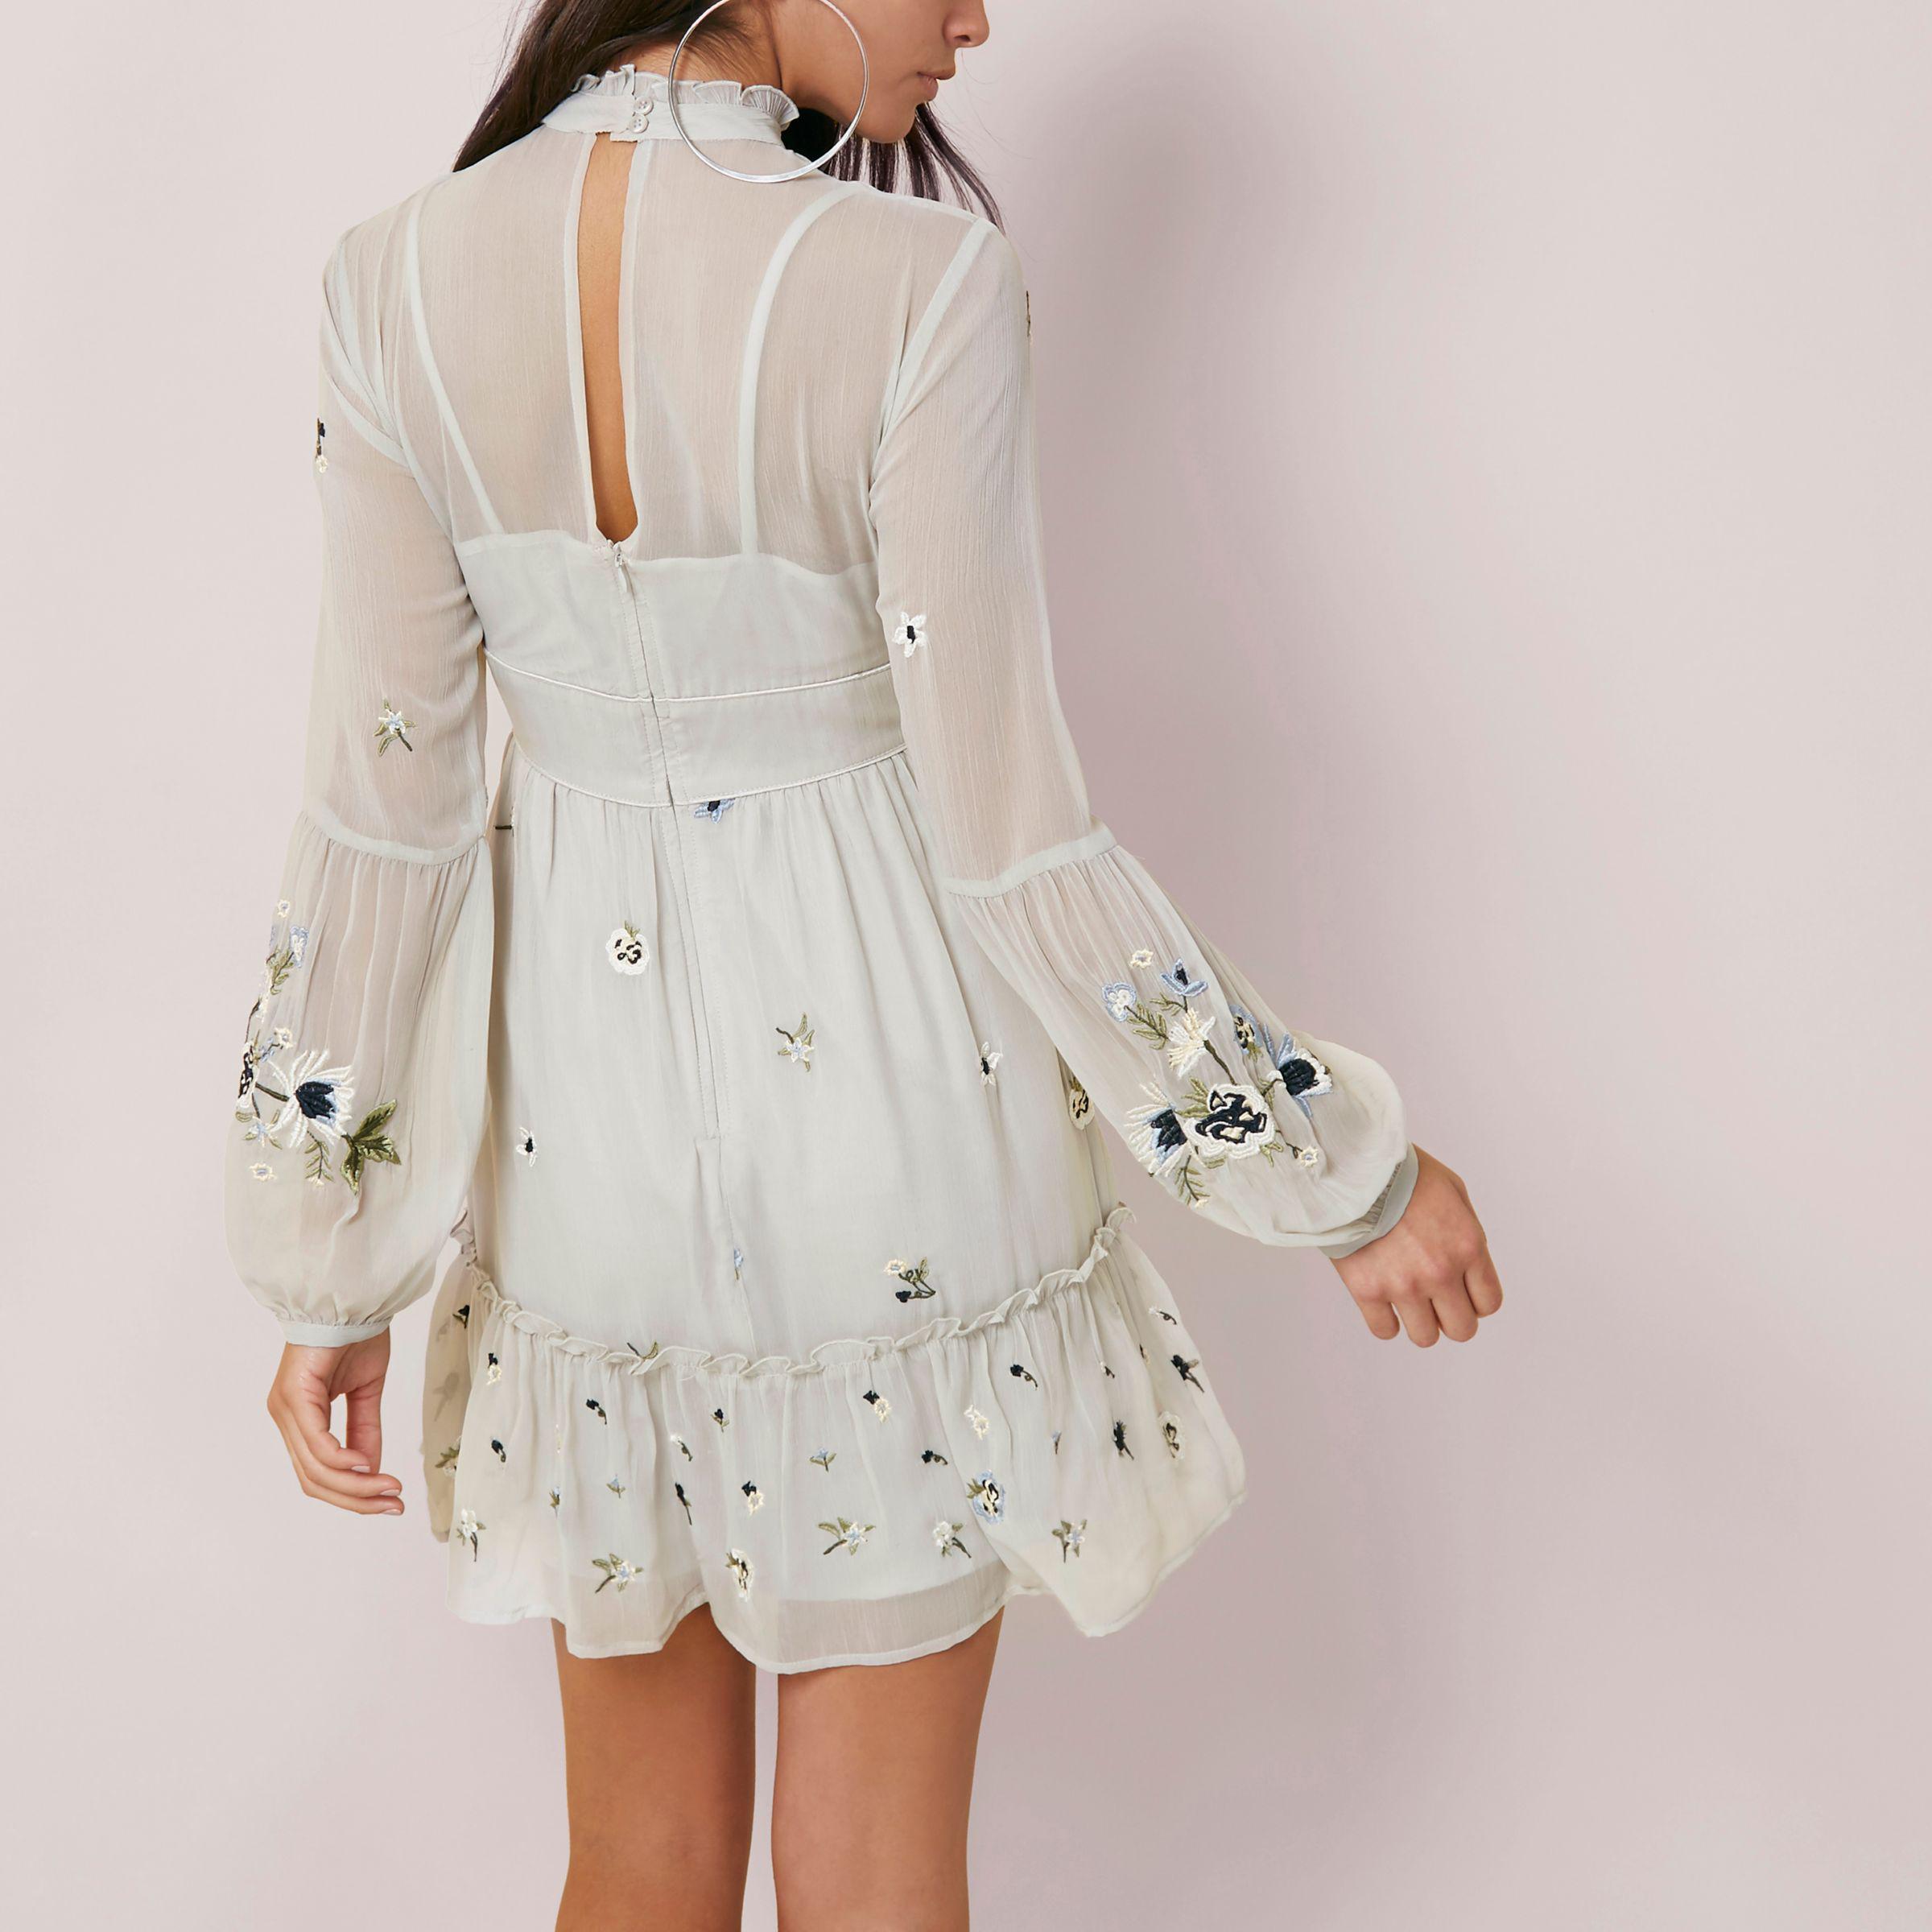 River Island Embroidered Dress Clearance, 56% OFF | siemaszko.pl